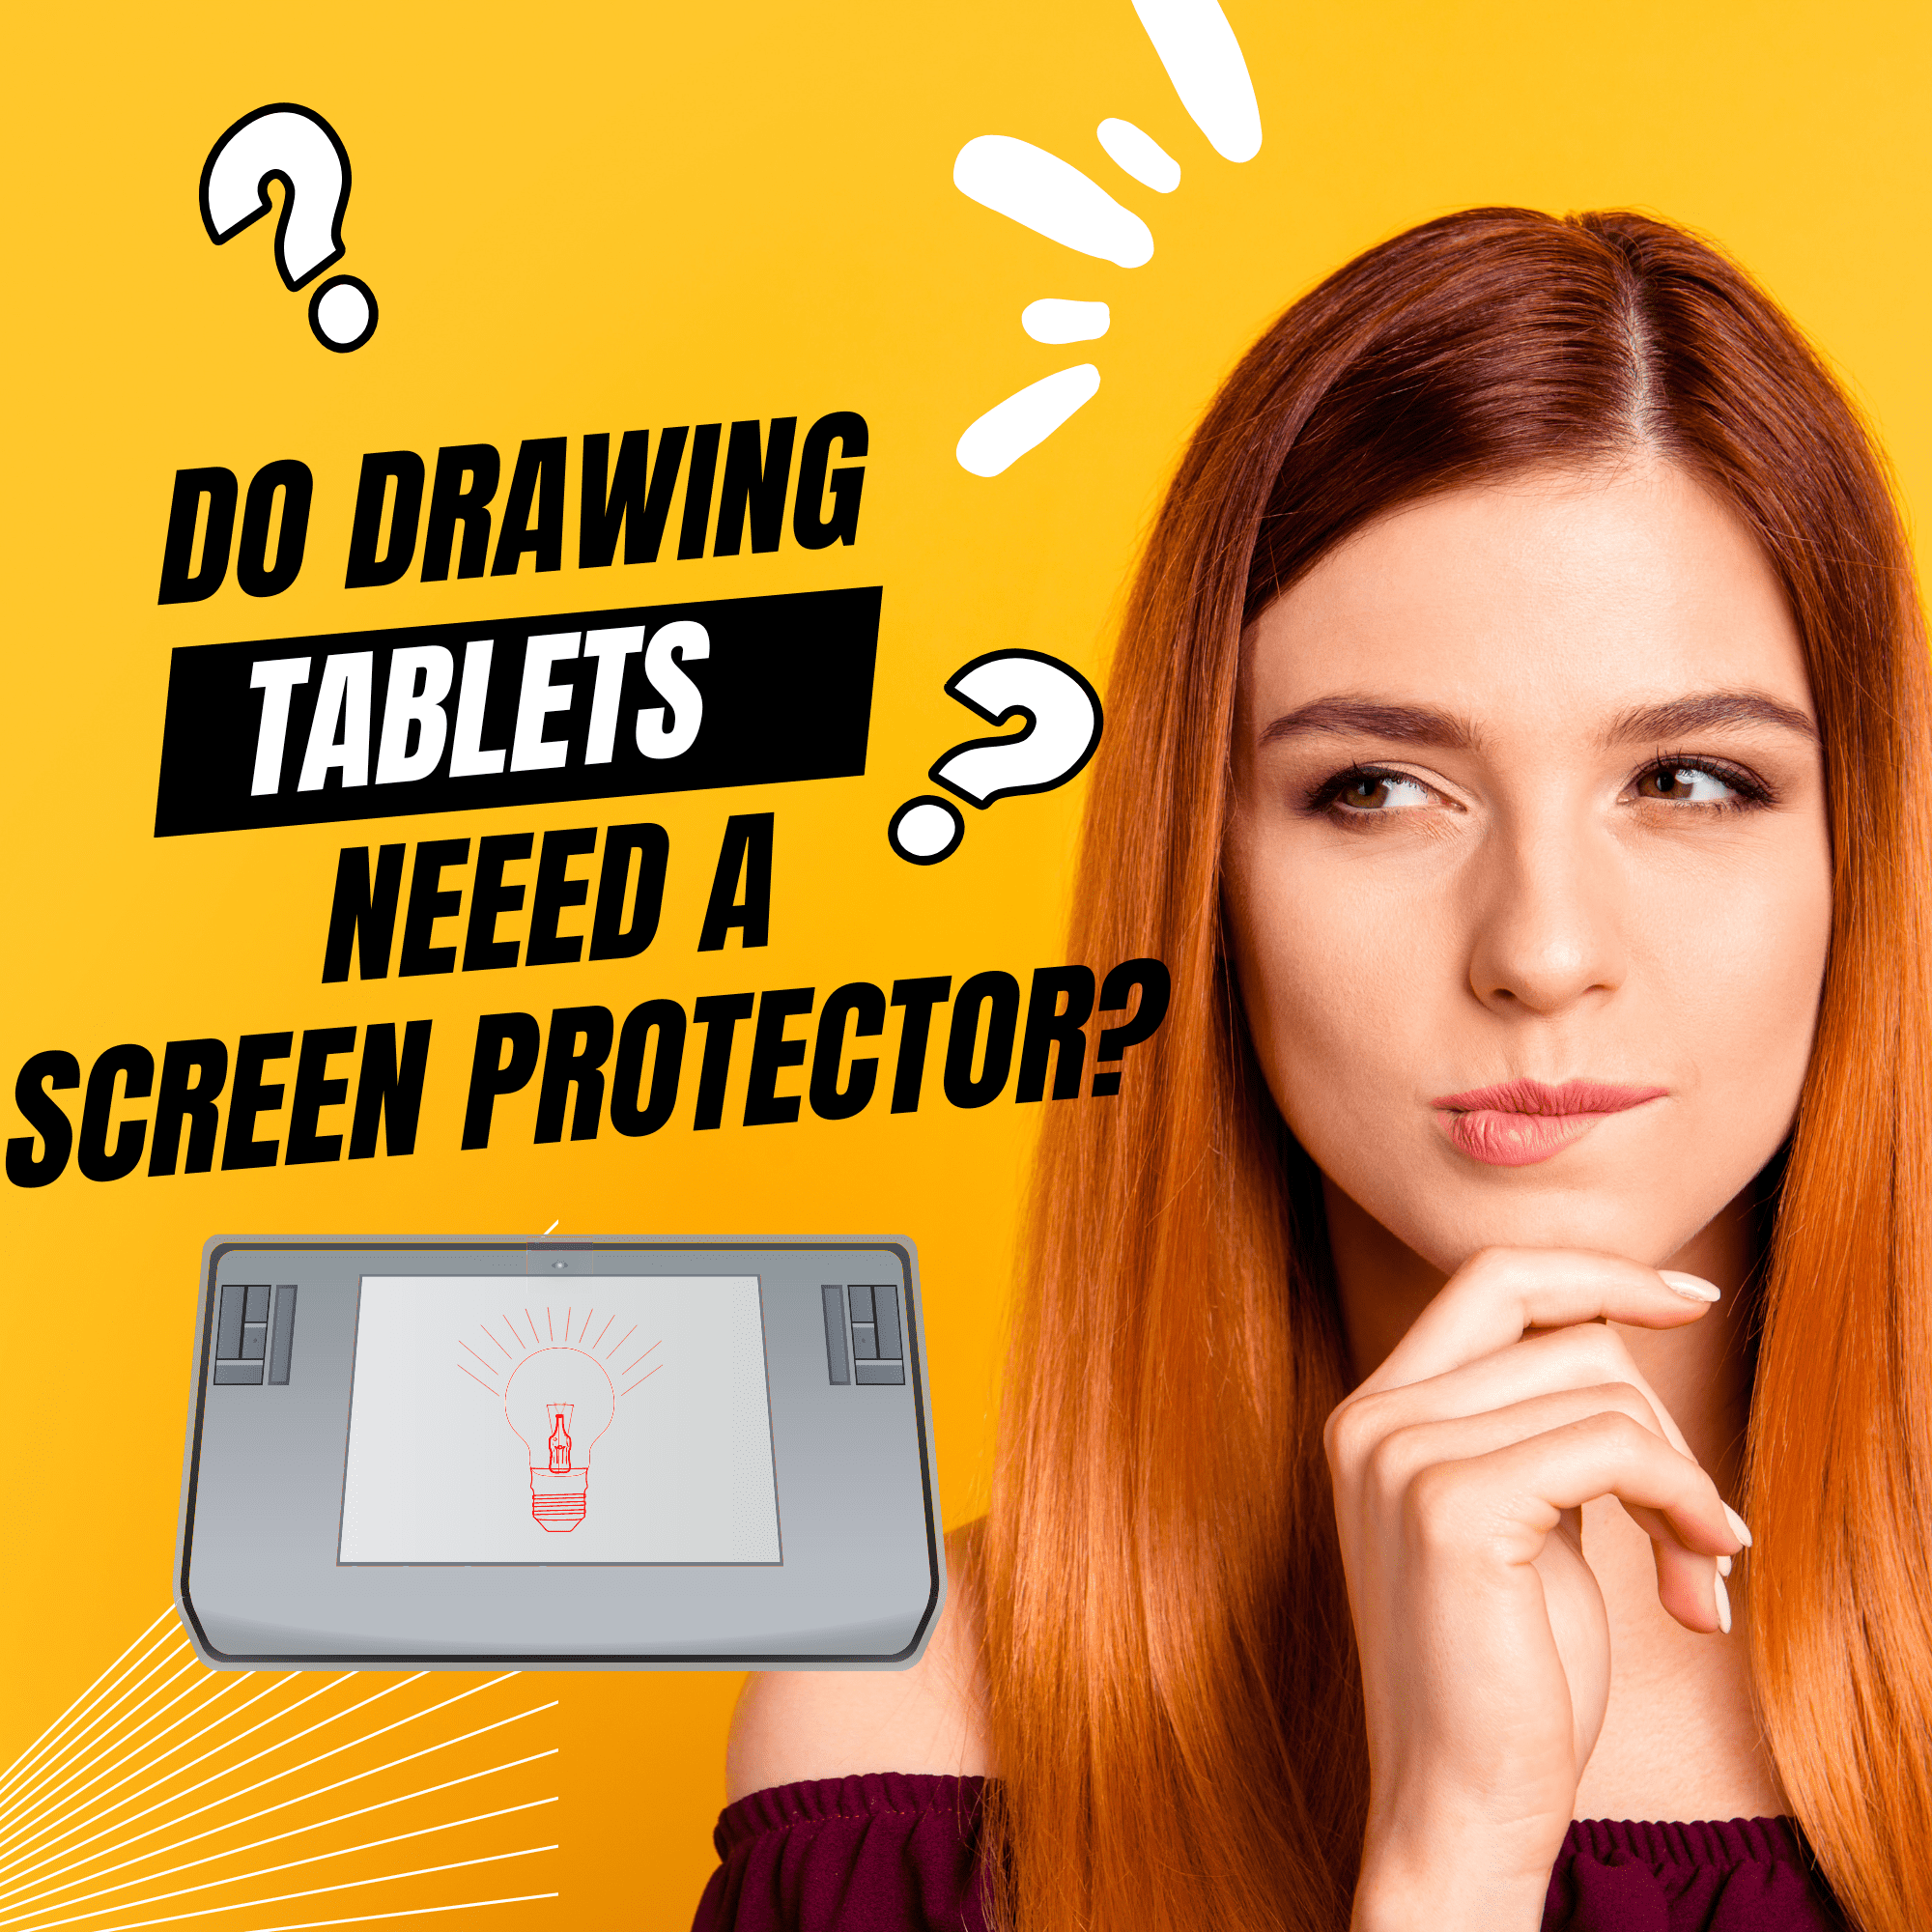 do drawing tablets need a screen protector? Answered